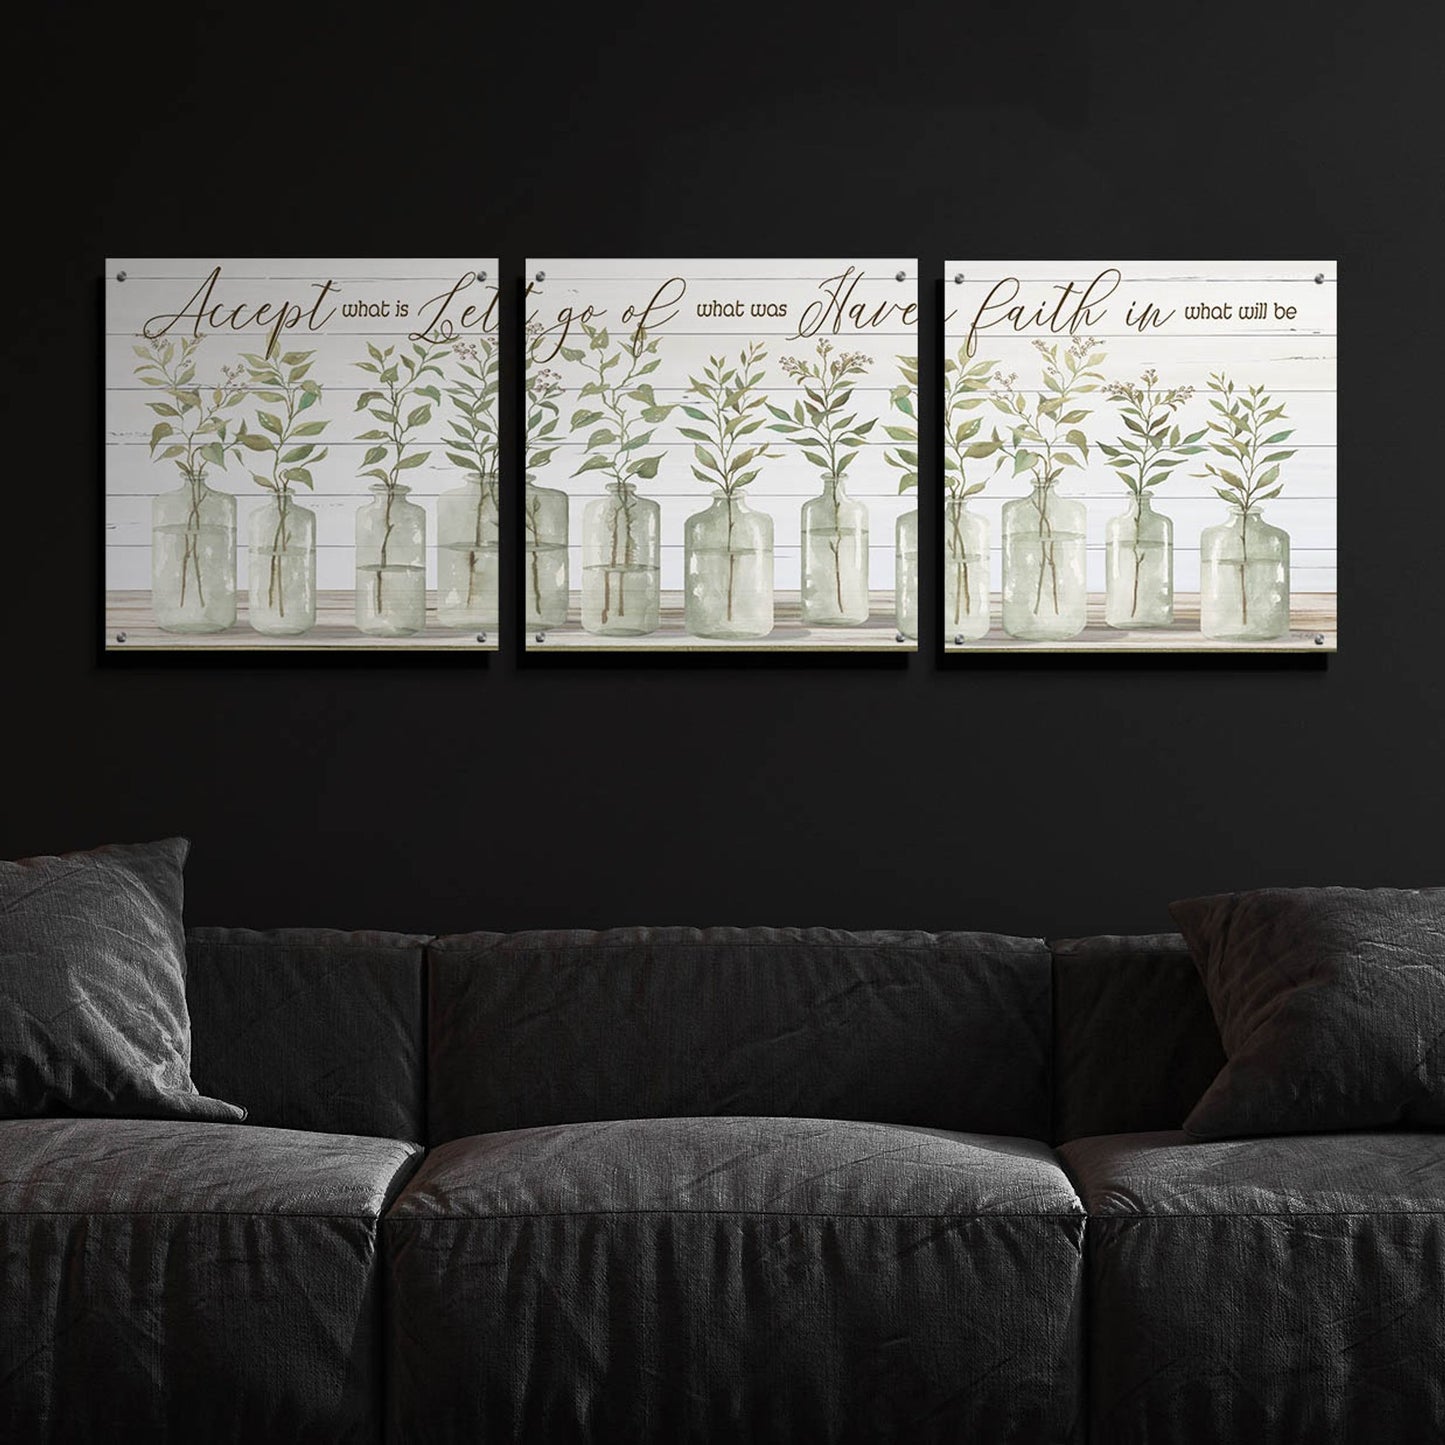 Epic Art 'Accept What Is' by Cindy Jacobs, Acrylic Glass Wall Art, 3 Piece Set,72x24